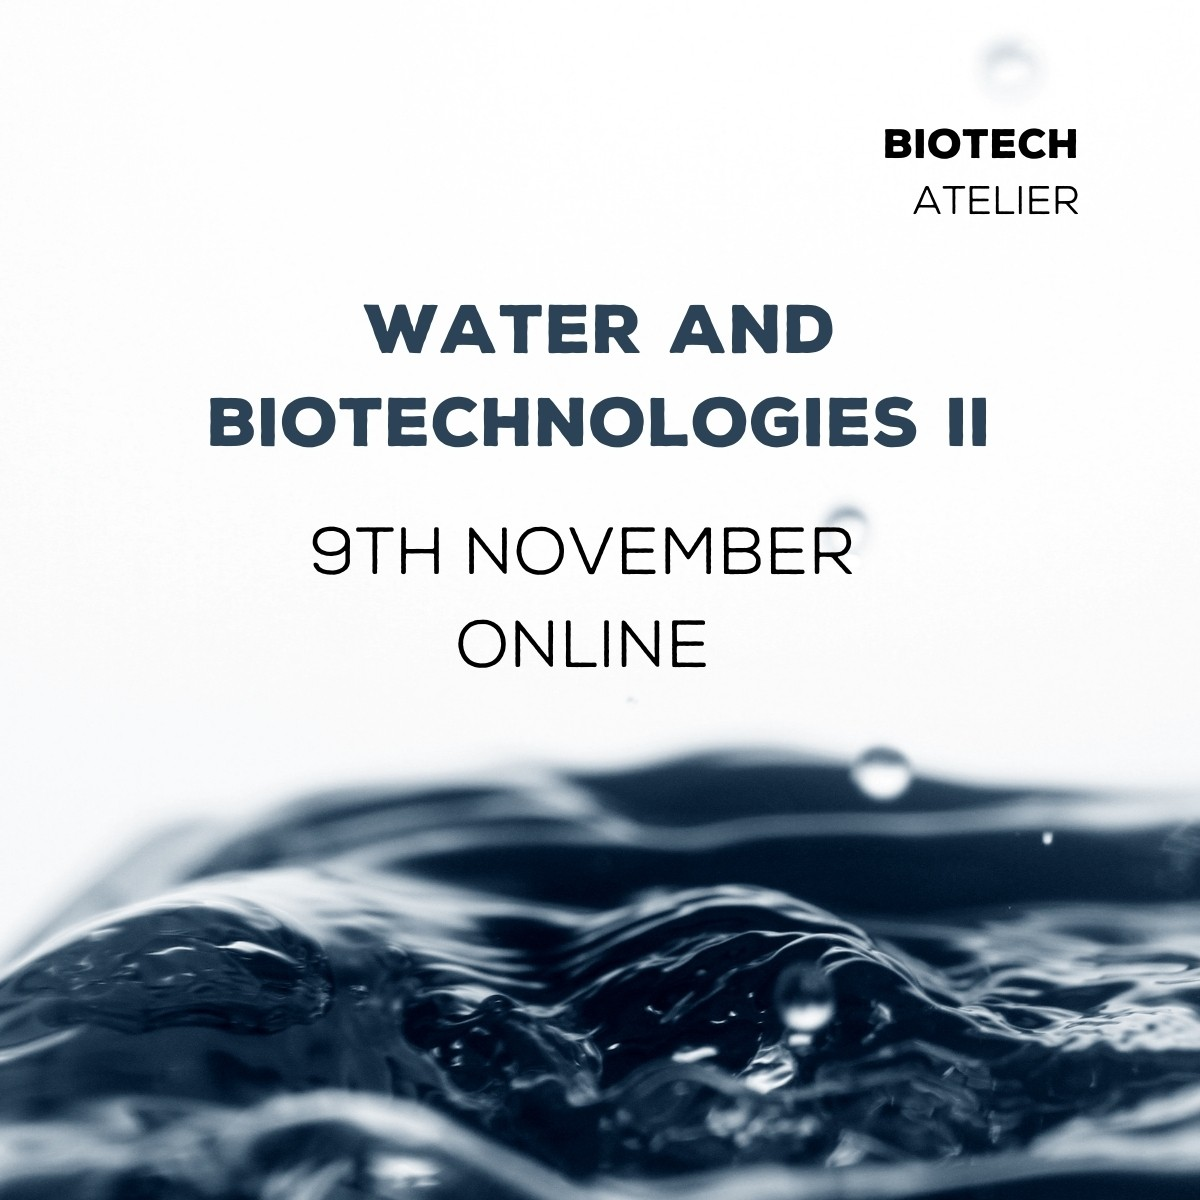 WATER AND BIOTECHNOLOGIES PART II